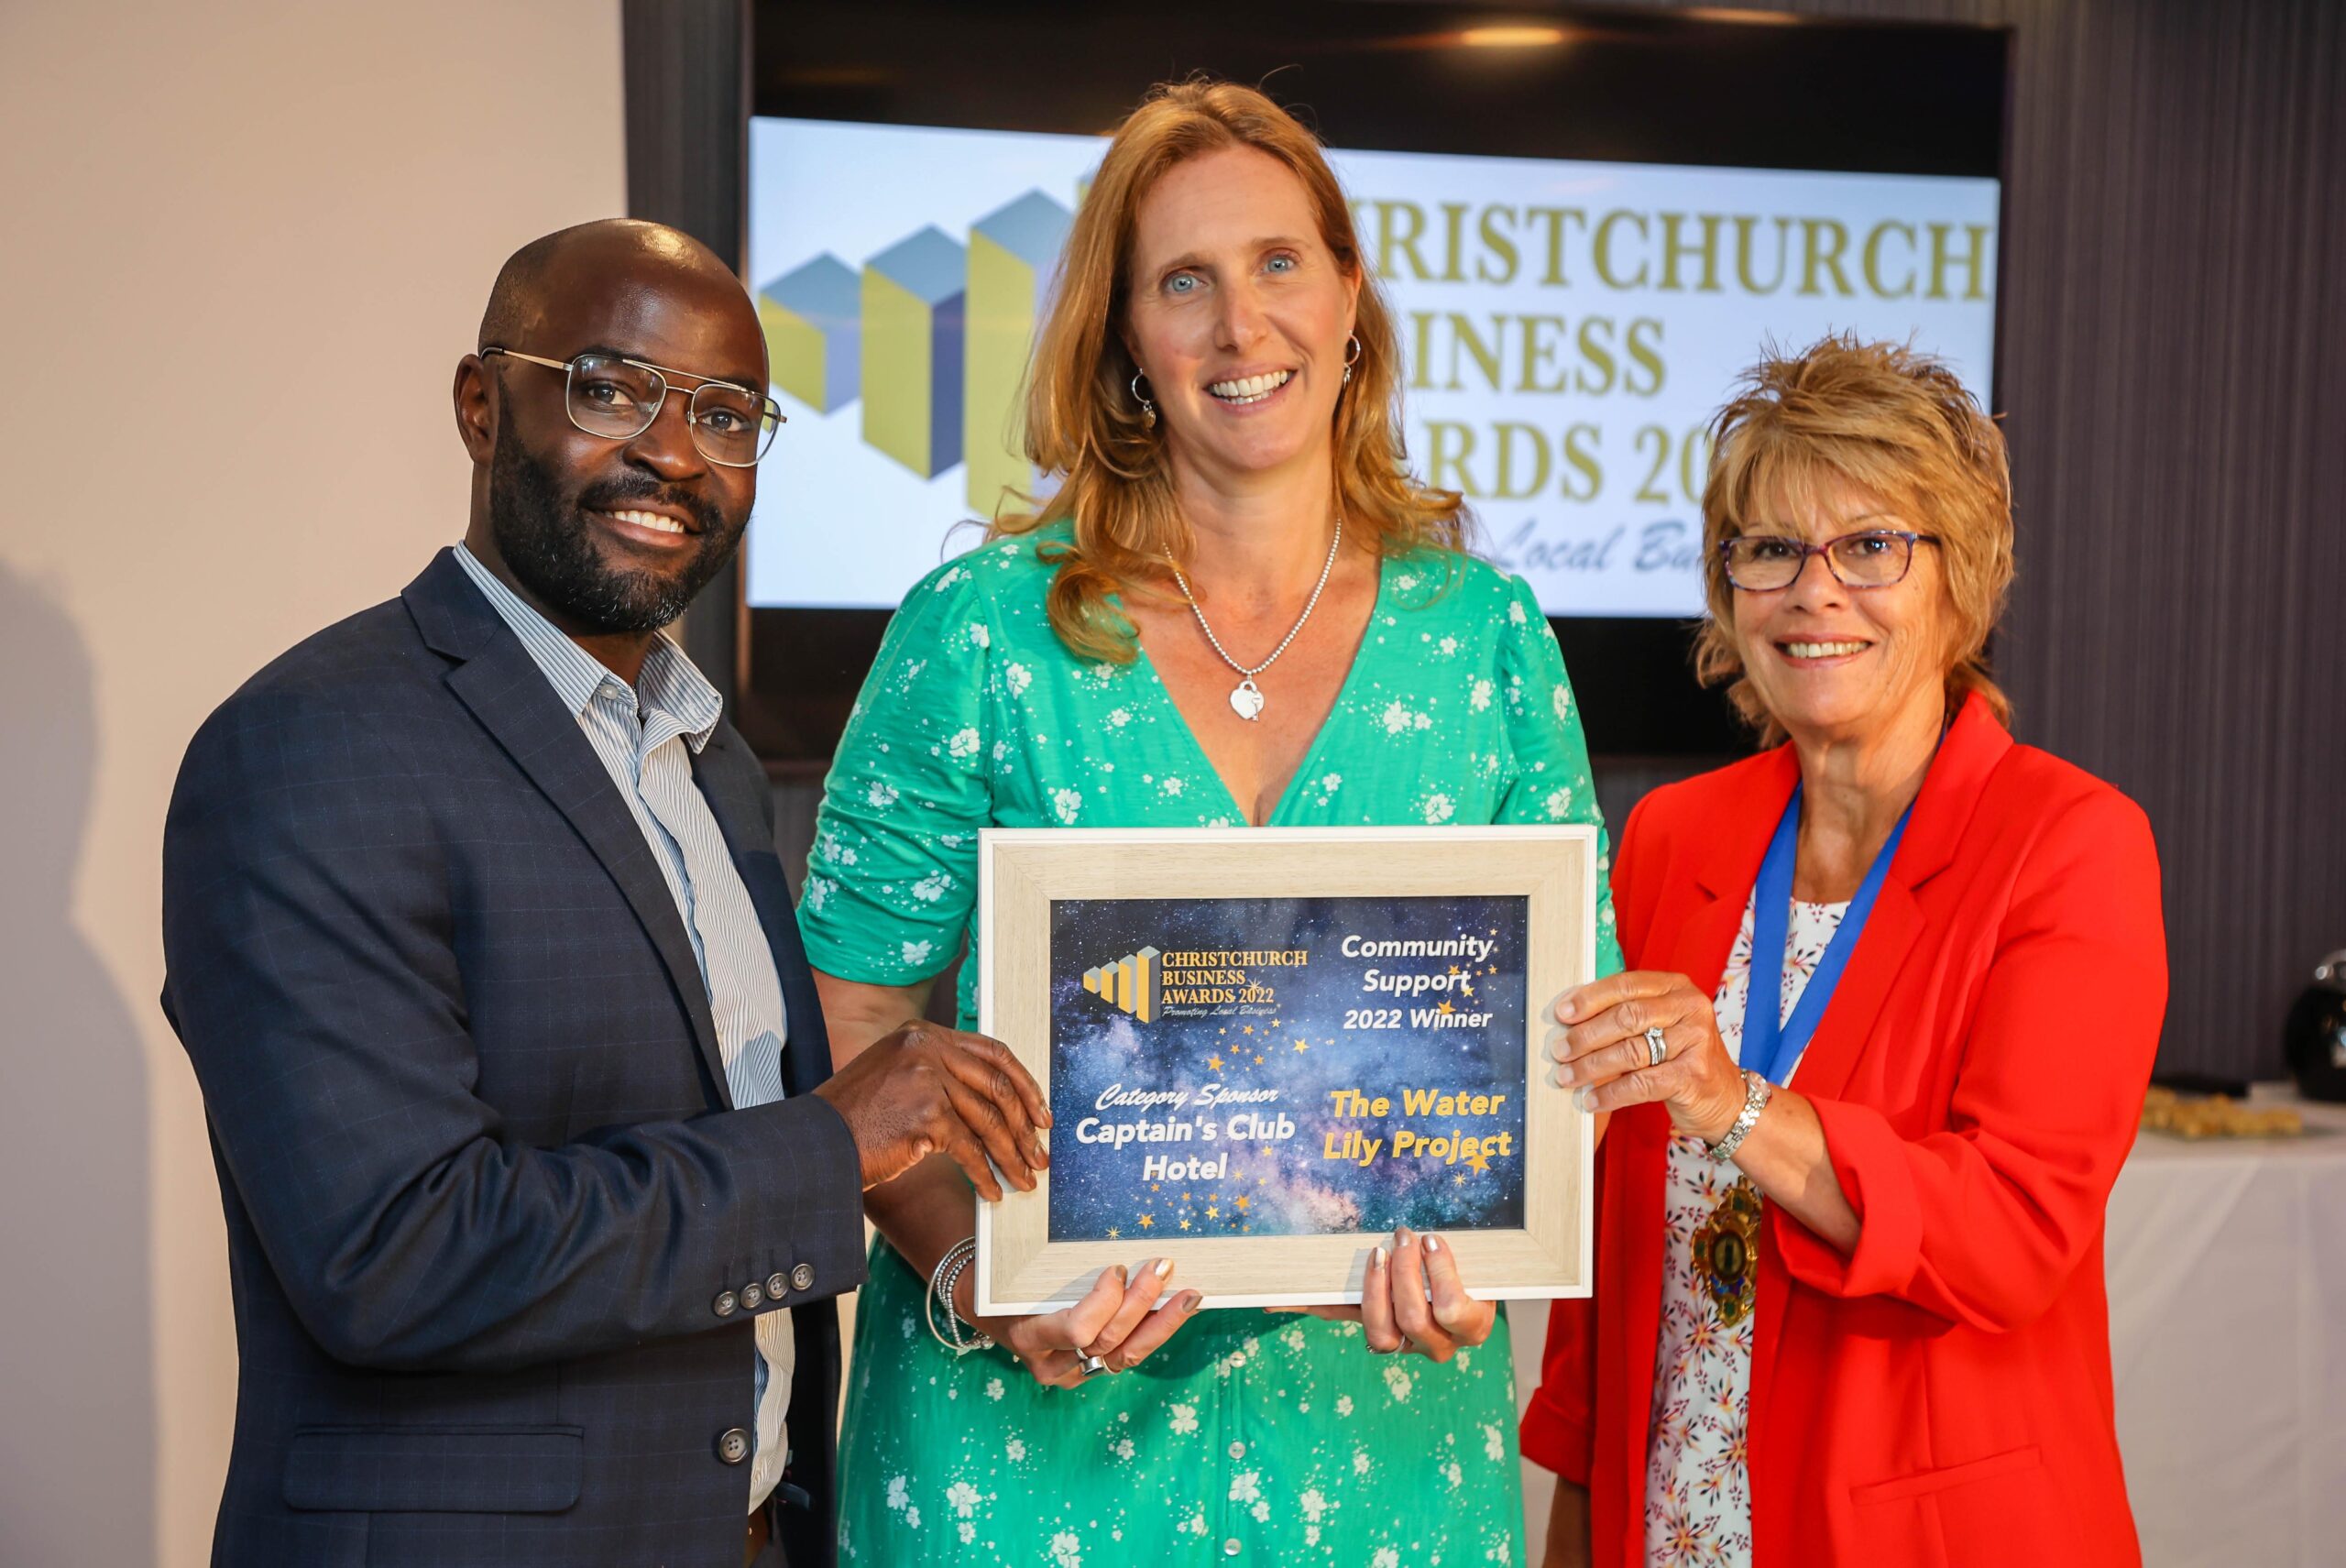 LIZ LEAVES ON A TRIUMPHANT WIN AS CHARITY SCOOPS COMMUNITY SUPPORT AWARD